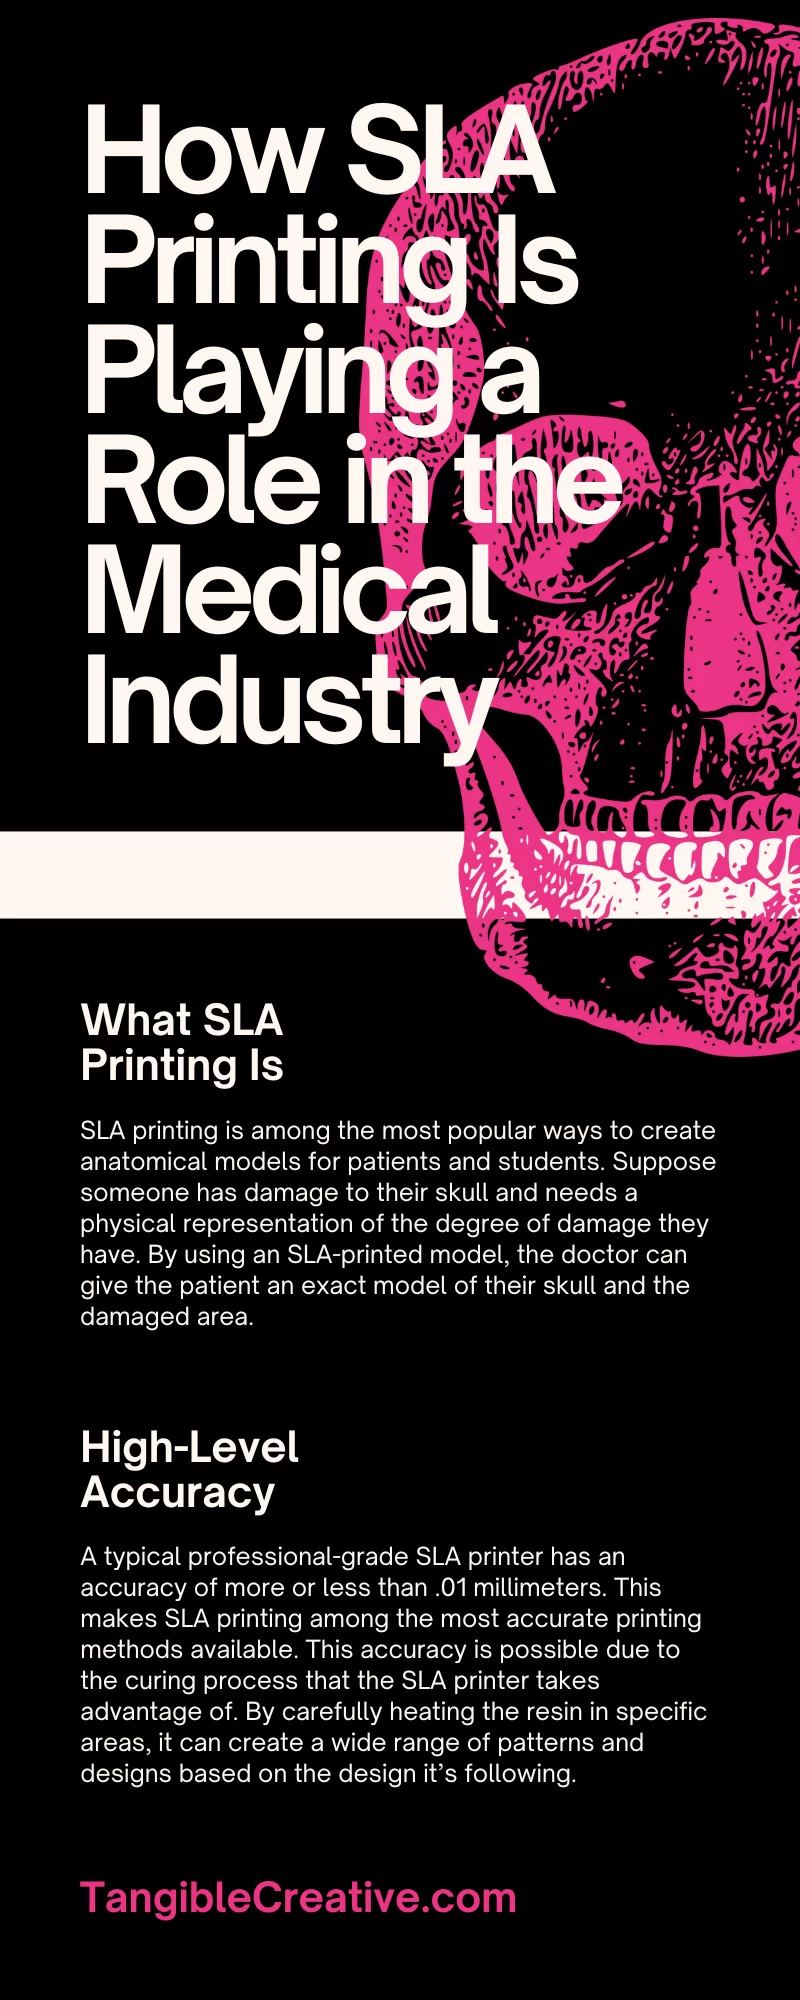 How SLA Printing Is Playing a Role in the Medical Industry